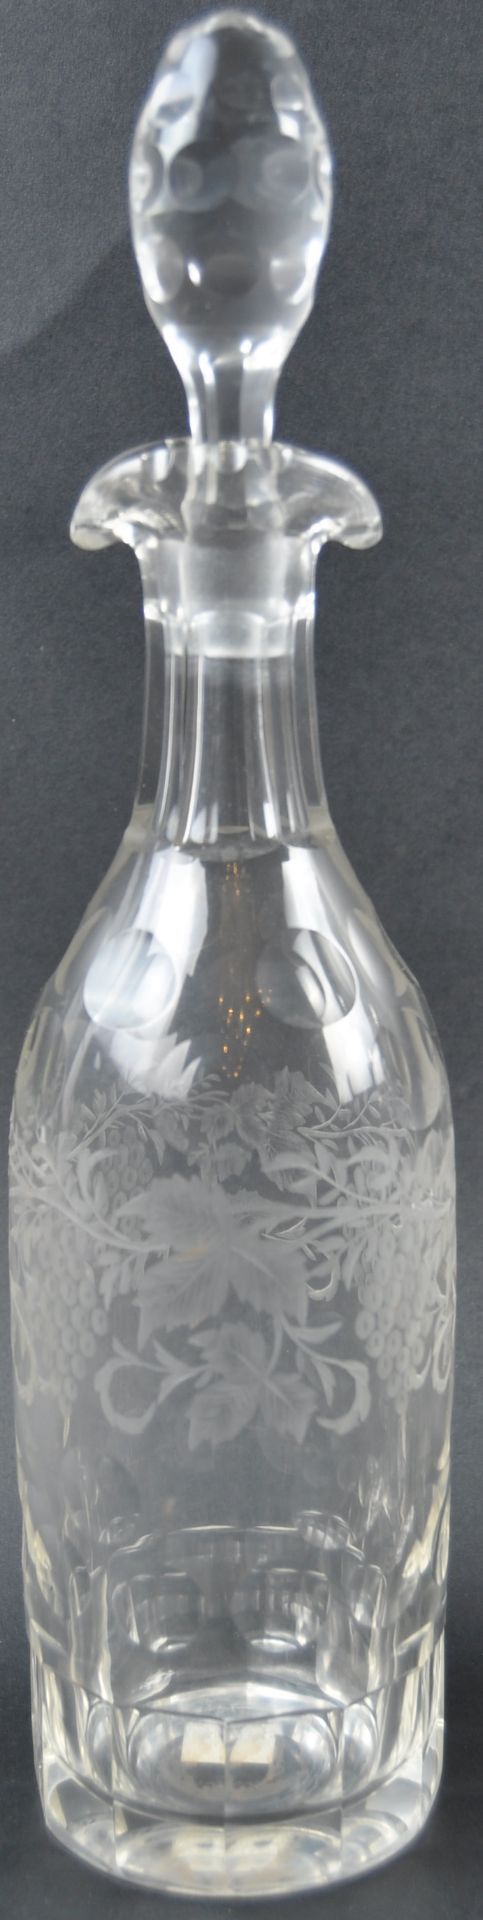 19TH CENTURY ETCHED GLASS DRINKS DECANTERS & GLASSES - Image 4 of 5